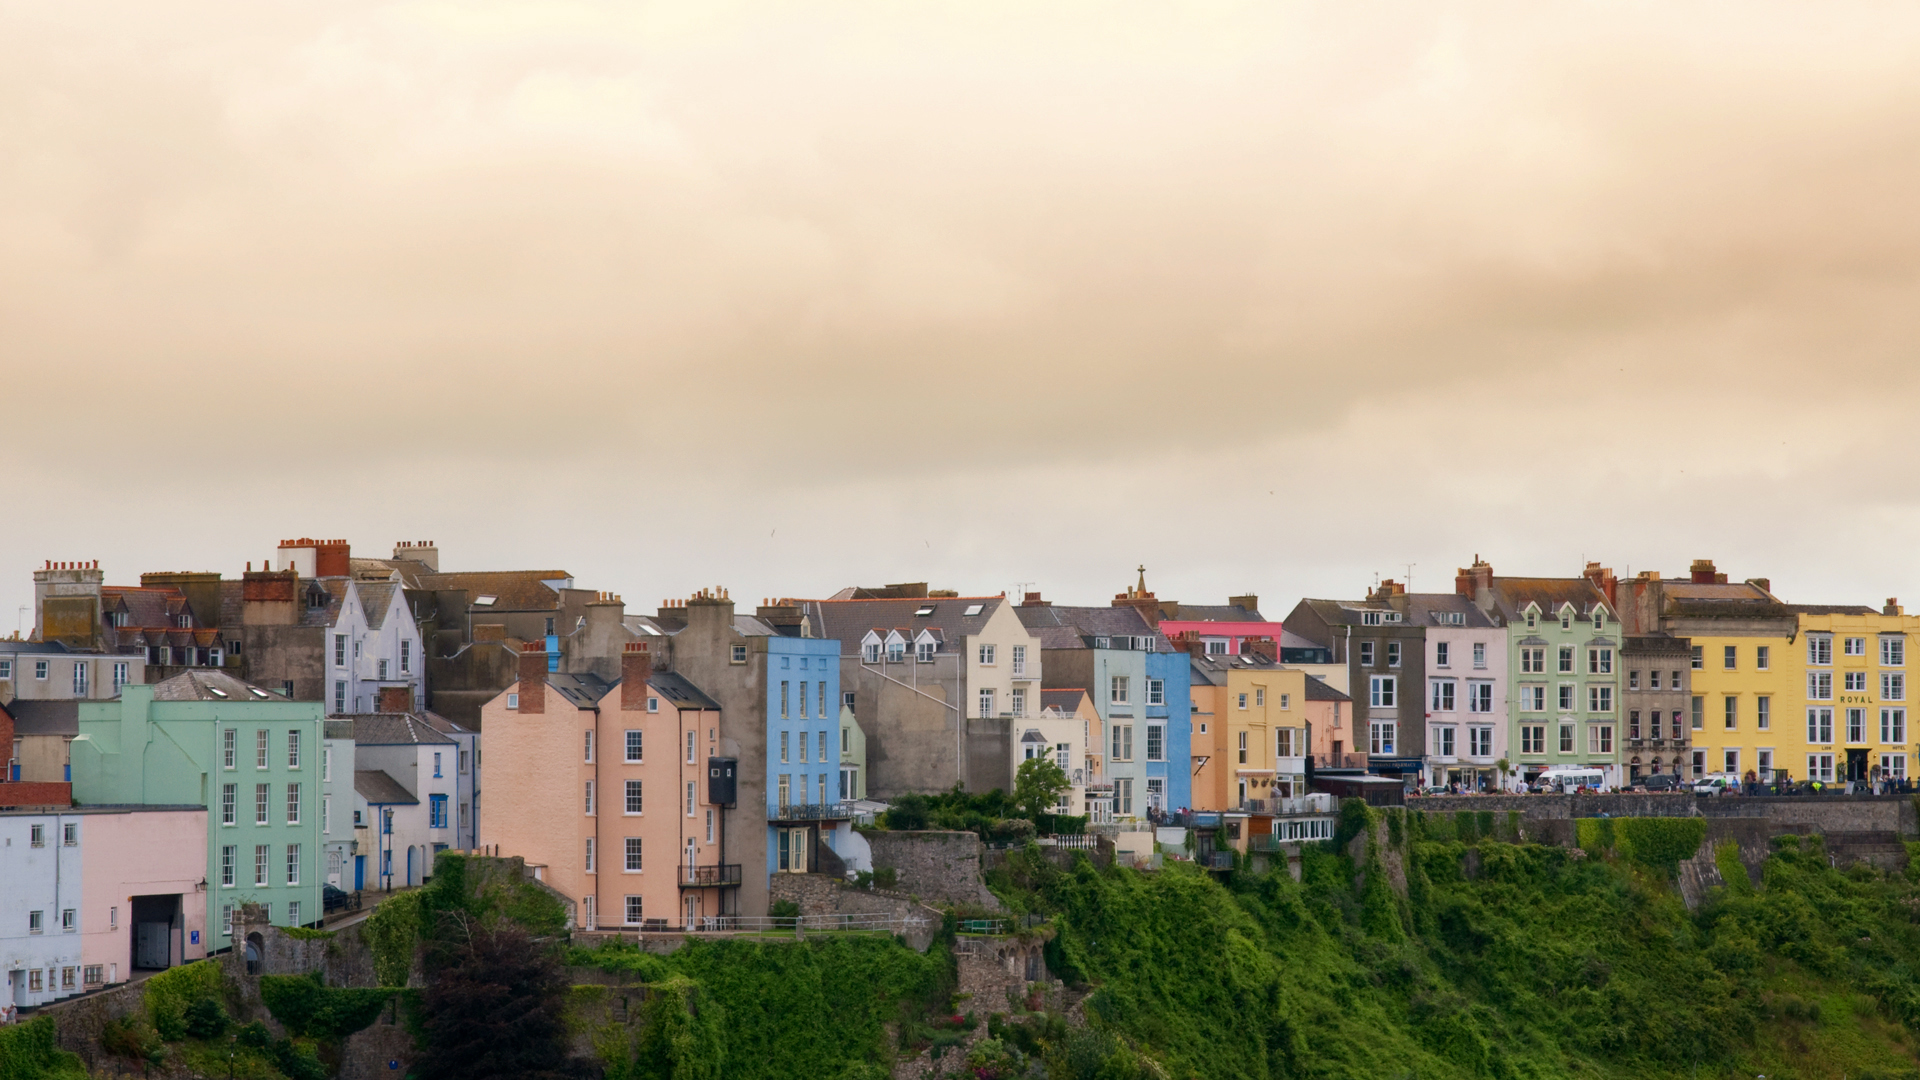 a group of colorful buildings in an area on a hillside